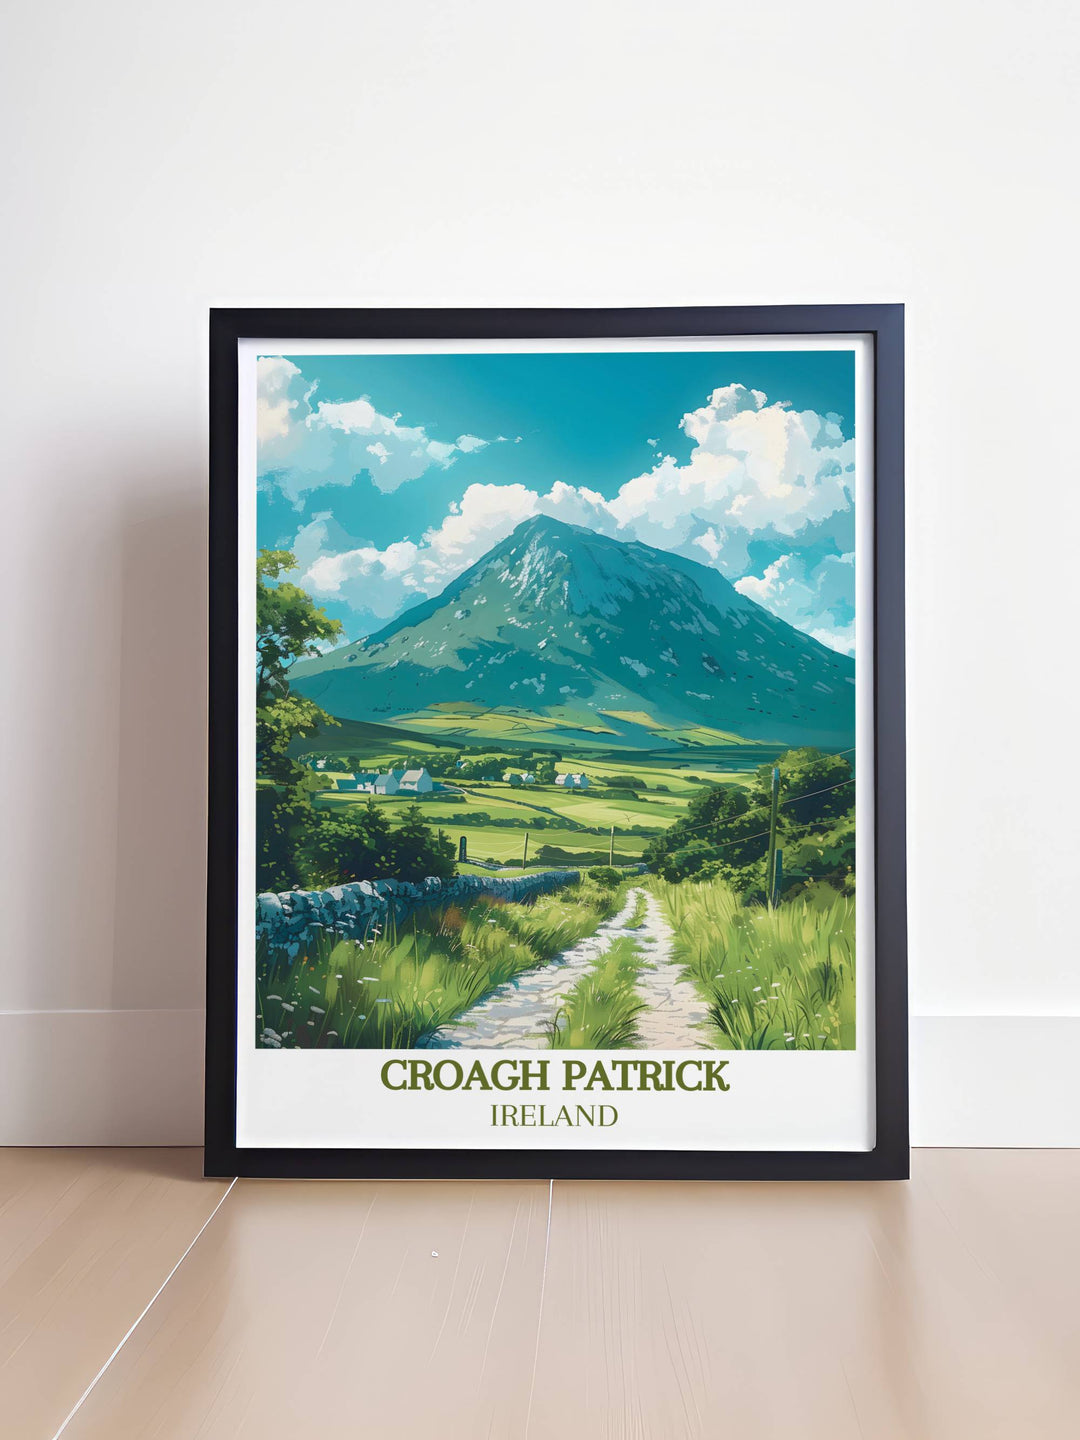 Celebrate Irish heritage with this Ireland travel print featuring Croagh Patrick and the iconic Saint Patrick statue. This artwork beautifully captures the essence of Tochar Phadraig and the cultural richness of Westport Ireland perfect for home decor.